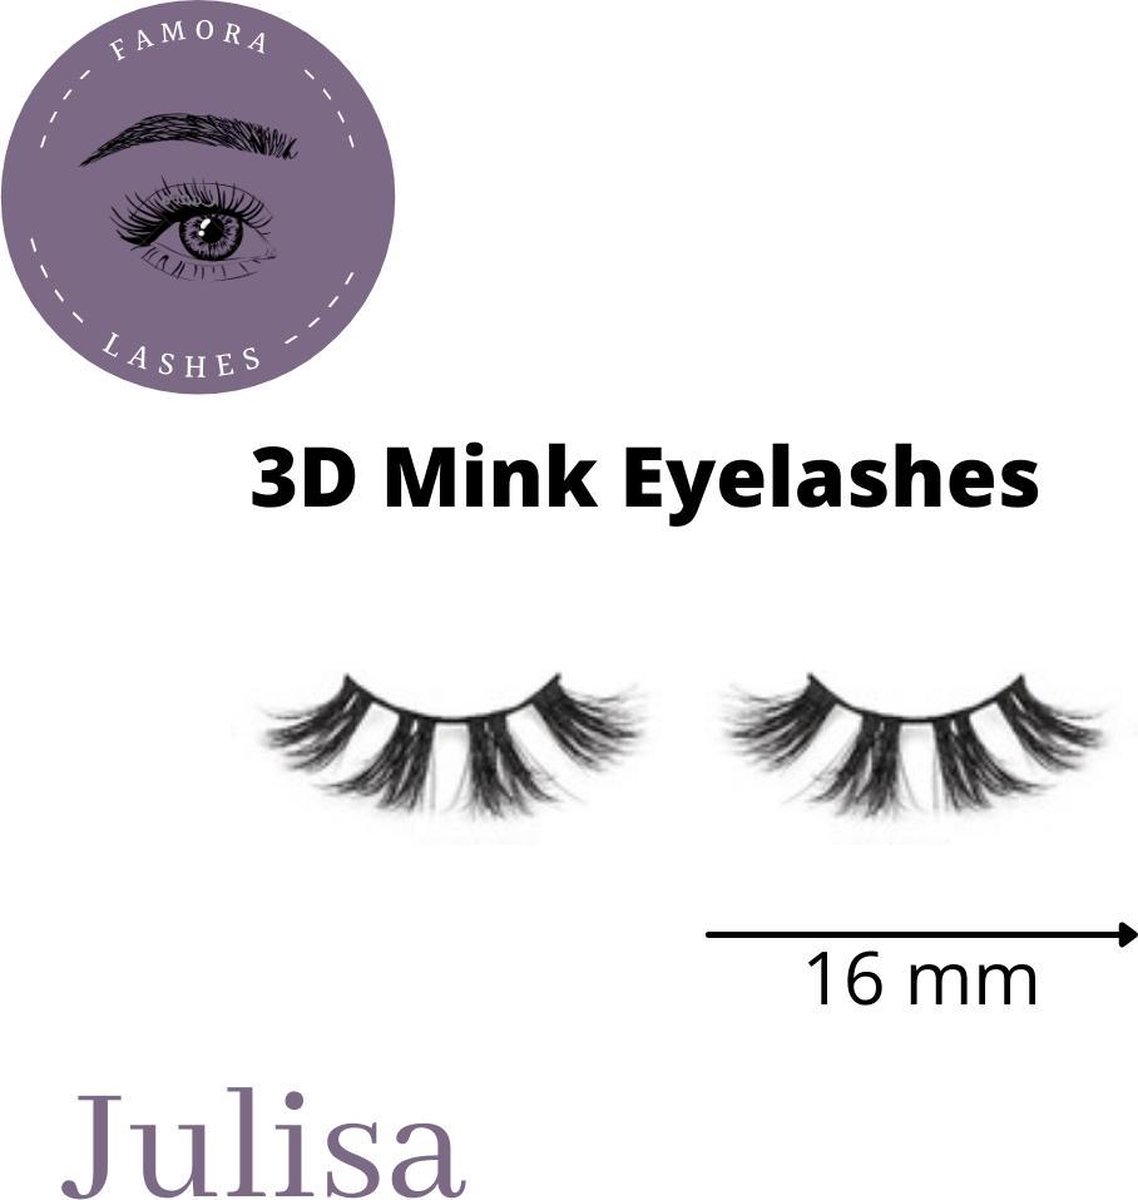 Michele Curls Beauty - Famora Lashes - Wimpers - Mink Wimpers - Valse Wimpers - Wimperstrip - Julisa